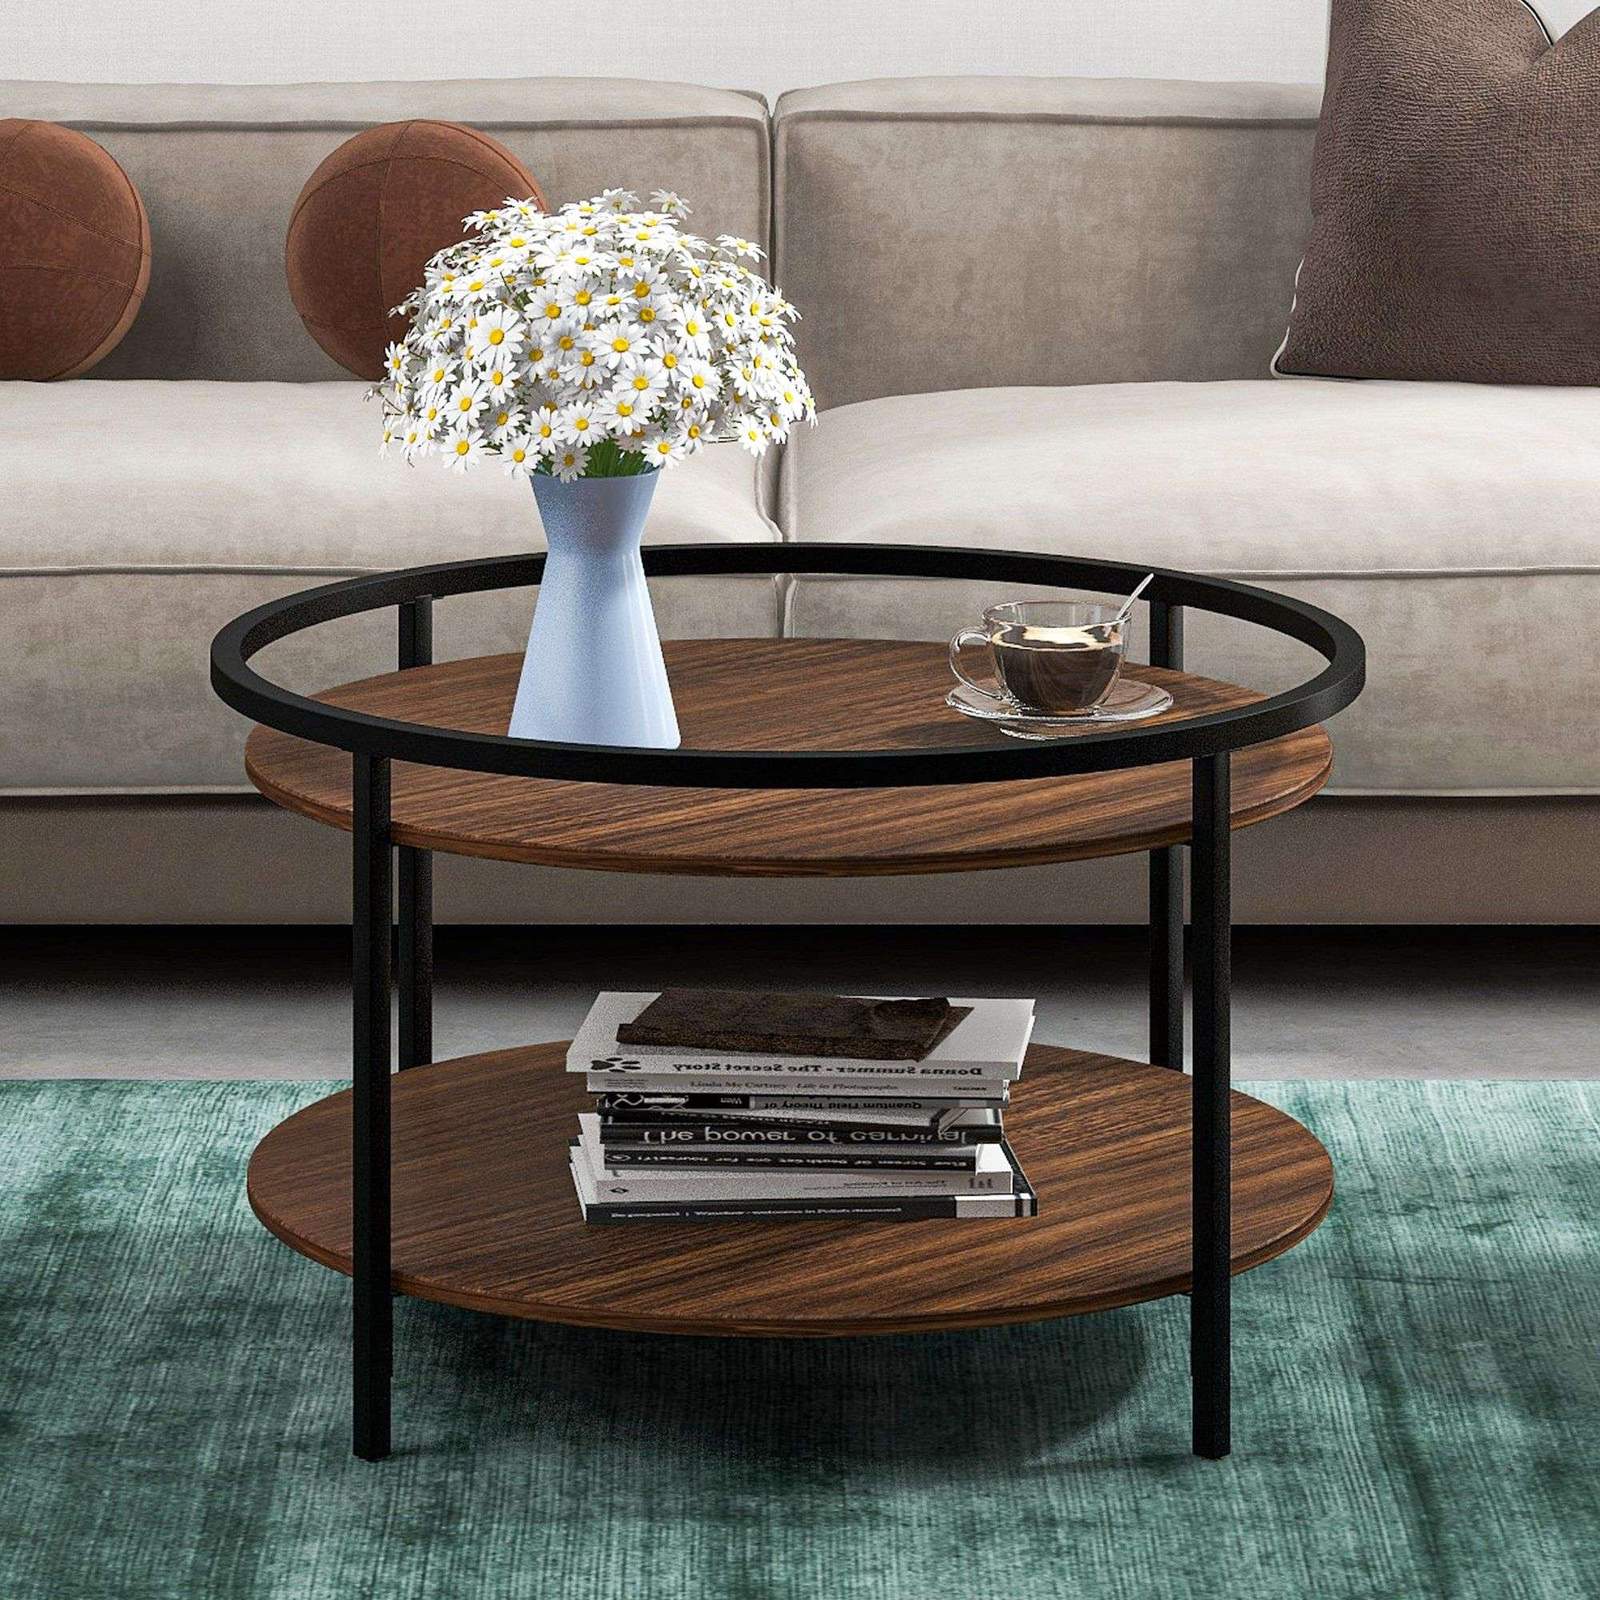 ON-TREND Cocktail Table Round Coffee Table Modern Industrial Design with Sink Top for Livingroom (BROWN)